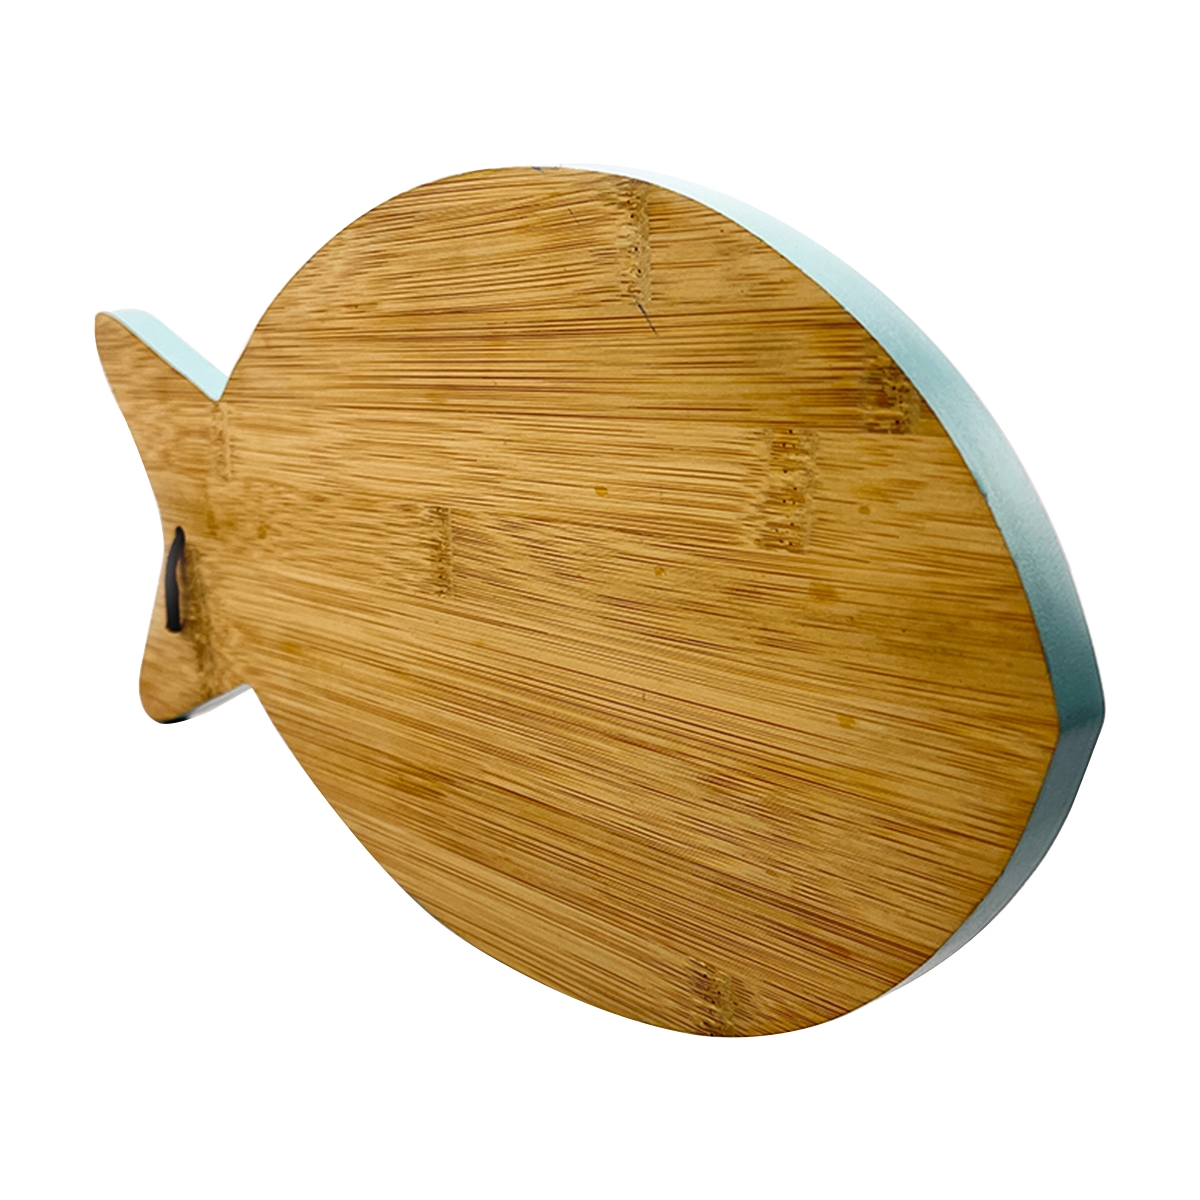 Natural Bamboo Wooden Cutting Board Fish Shaped Kitchen Chopping Board Large Wood Charcuterie Serving Boards